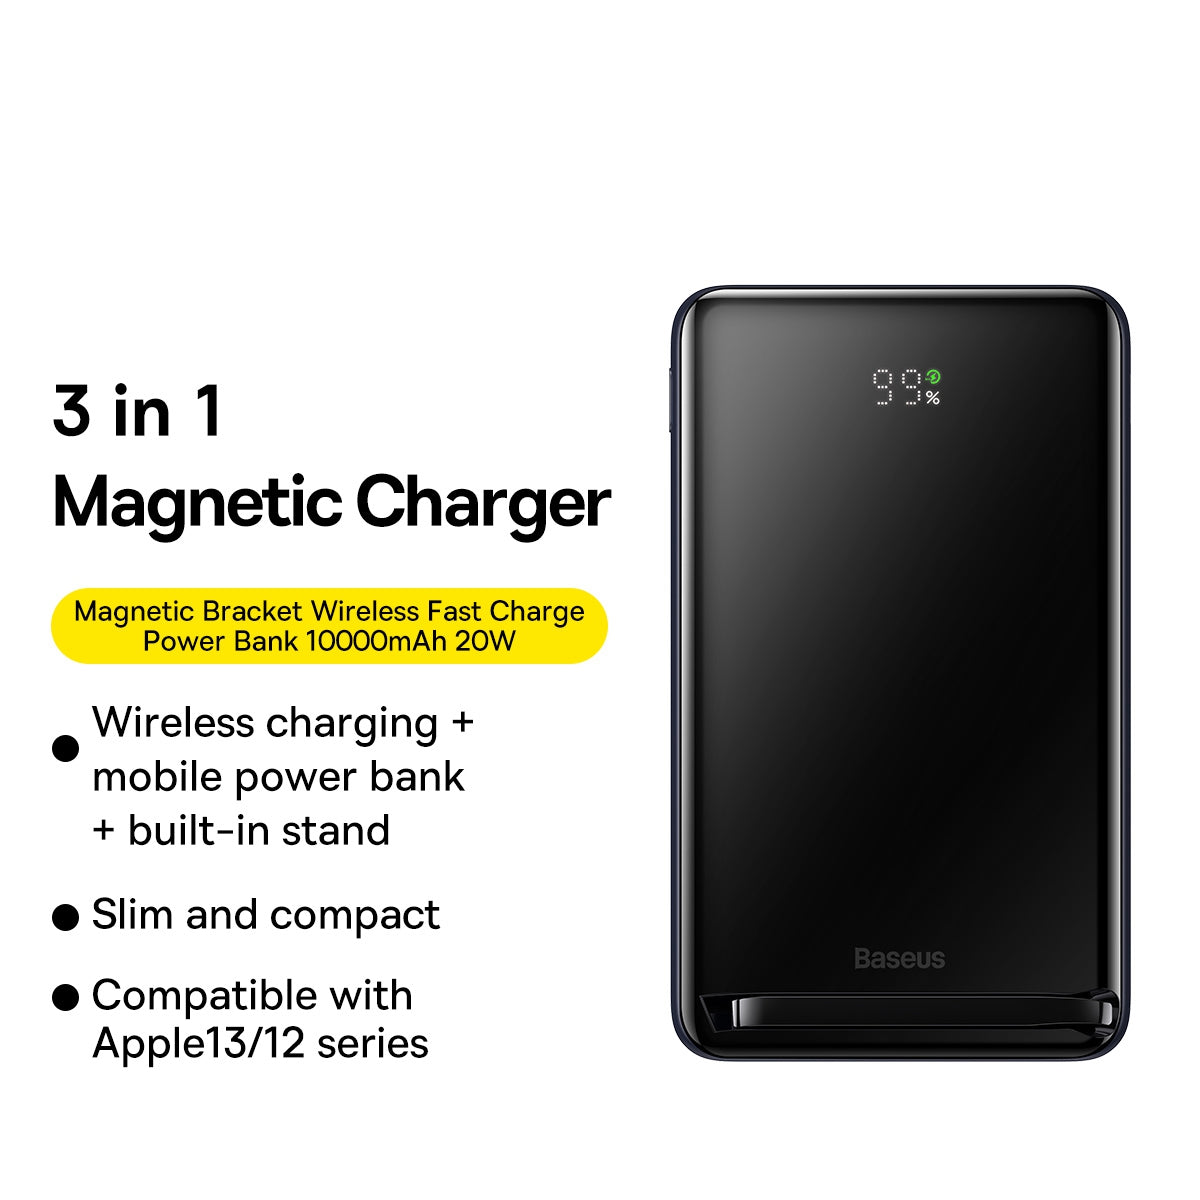 BASEUS 10000mAh Power Bank 20W Magnetic Wireless Charger Phone Quick Charging External Battery Pack Phone Holder Stand